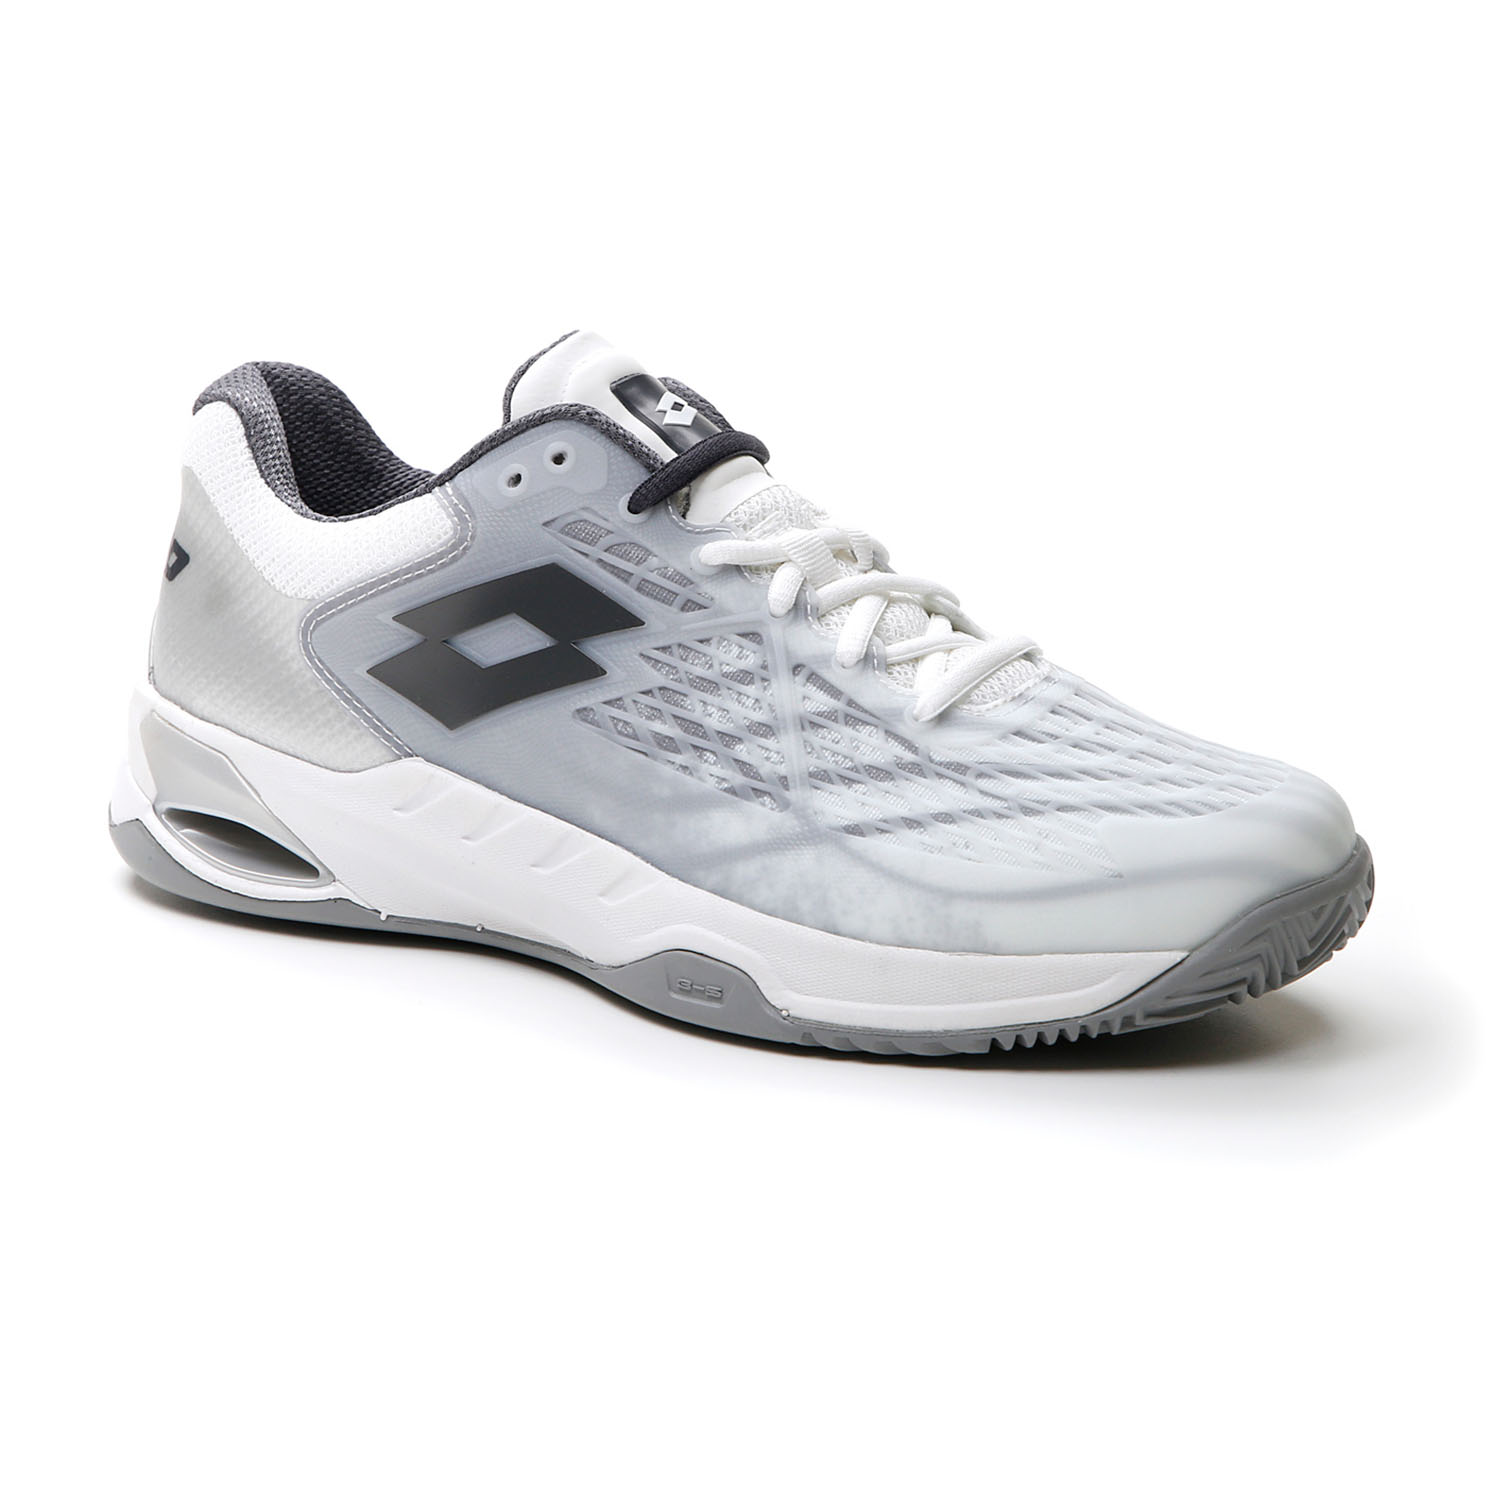 Lotto Mirage 100 Clay - All White/Asphalt/Silver Metal 2